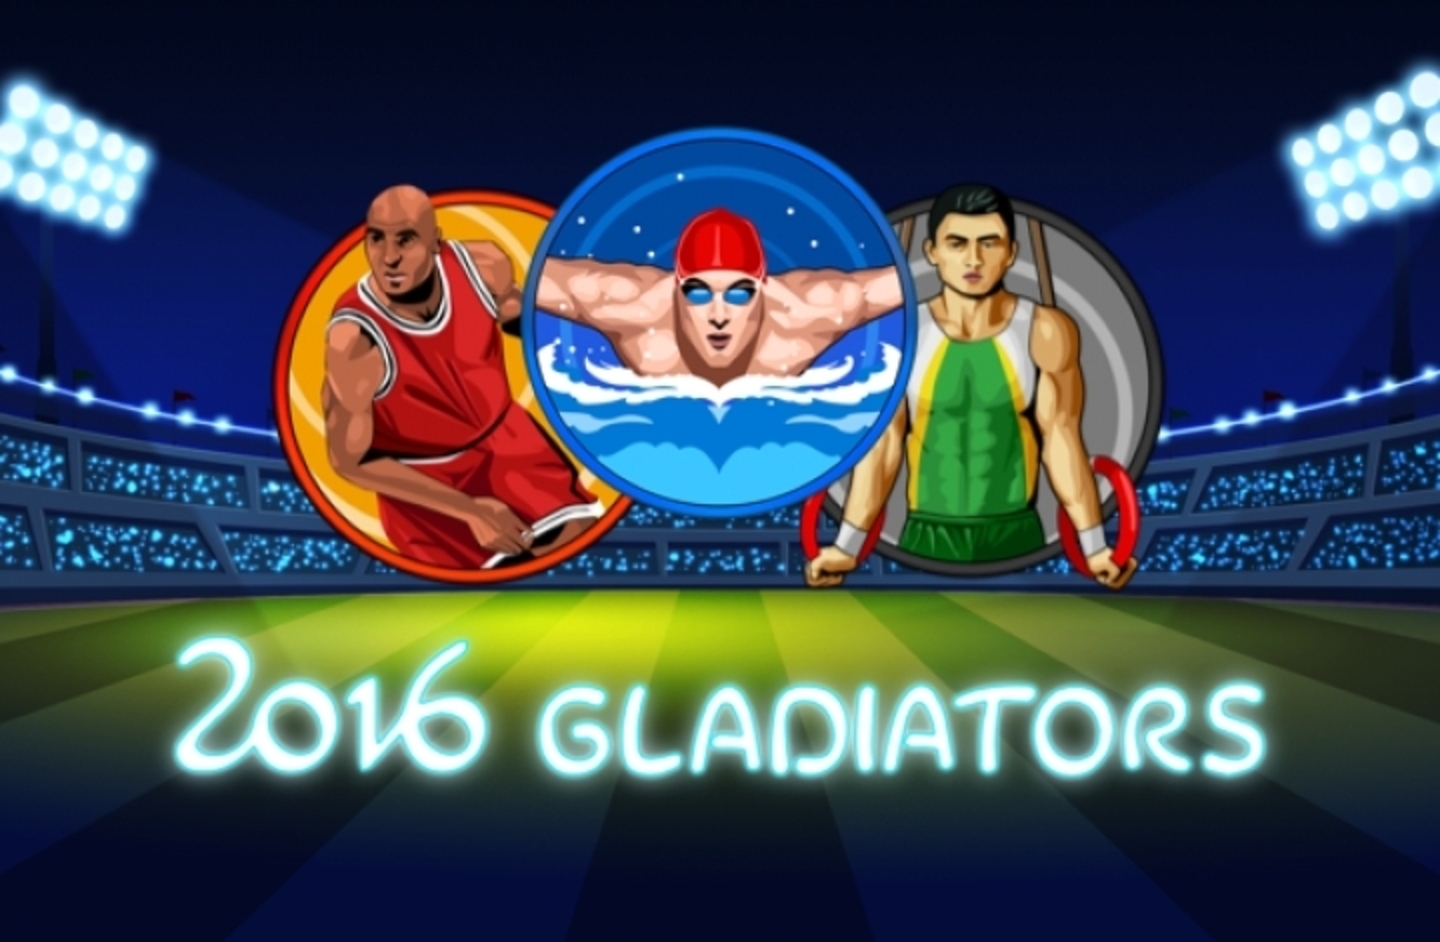 The 2016 Gladiators Online Slot Demo Game by Endorphina